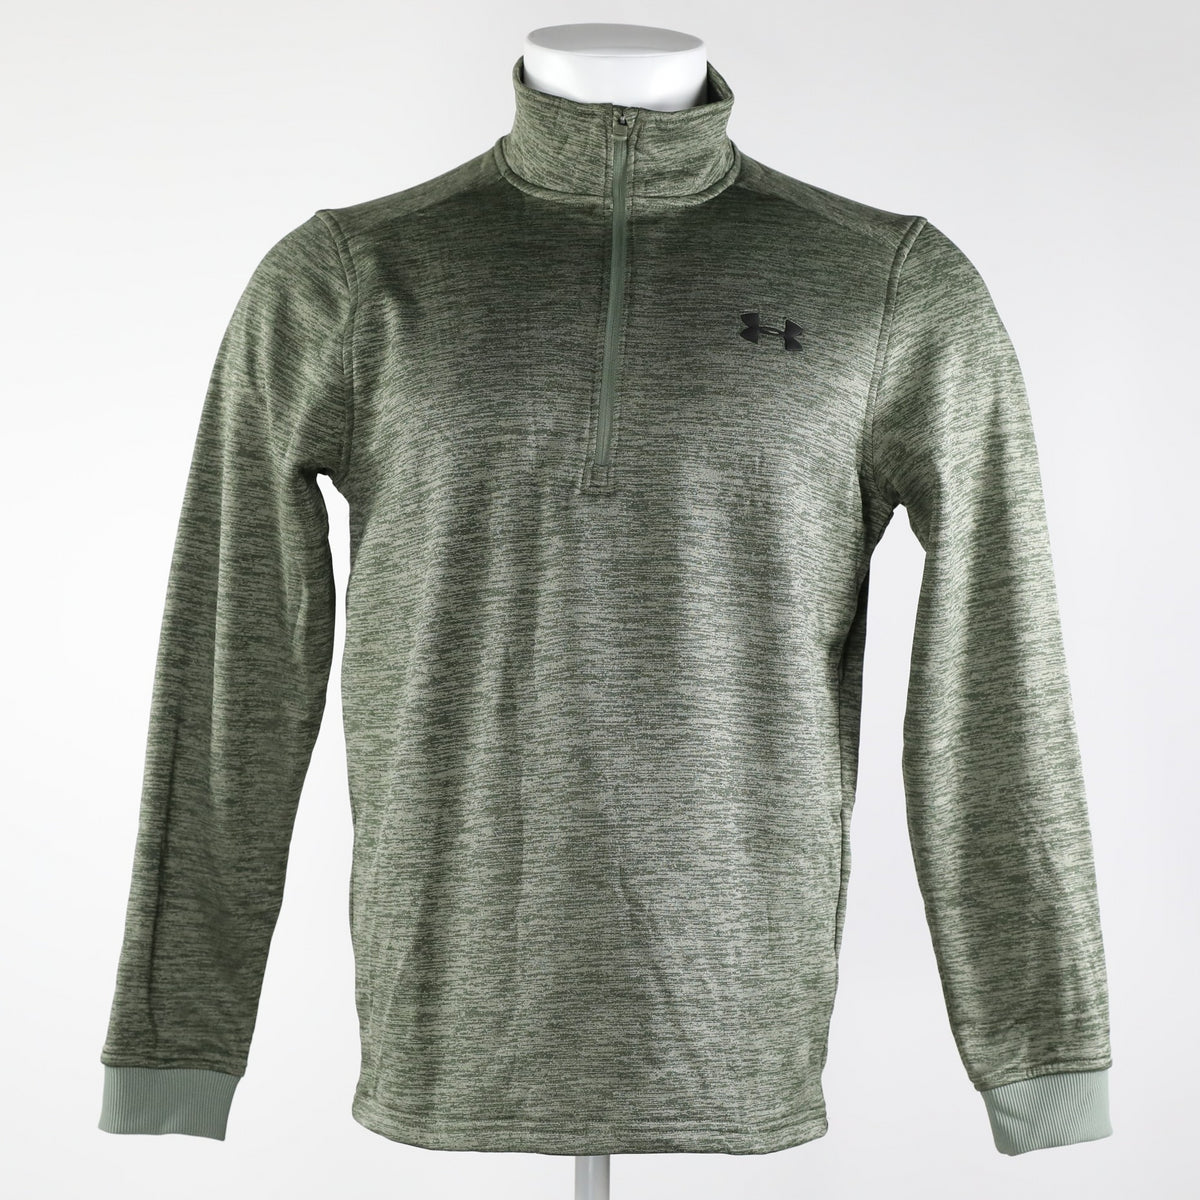 Under Armour Men's Active Jacket Size:S Green